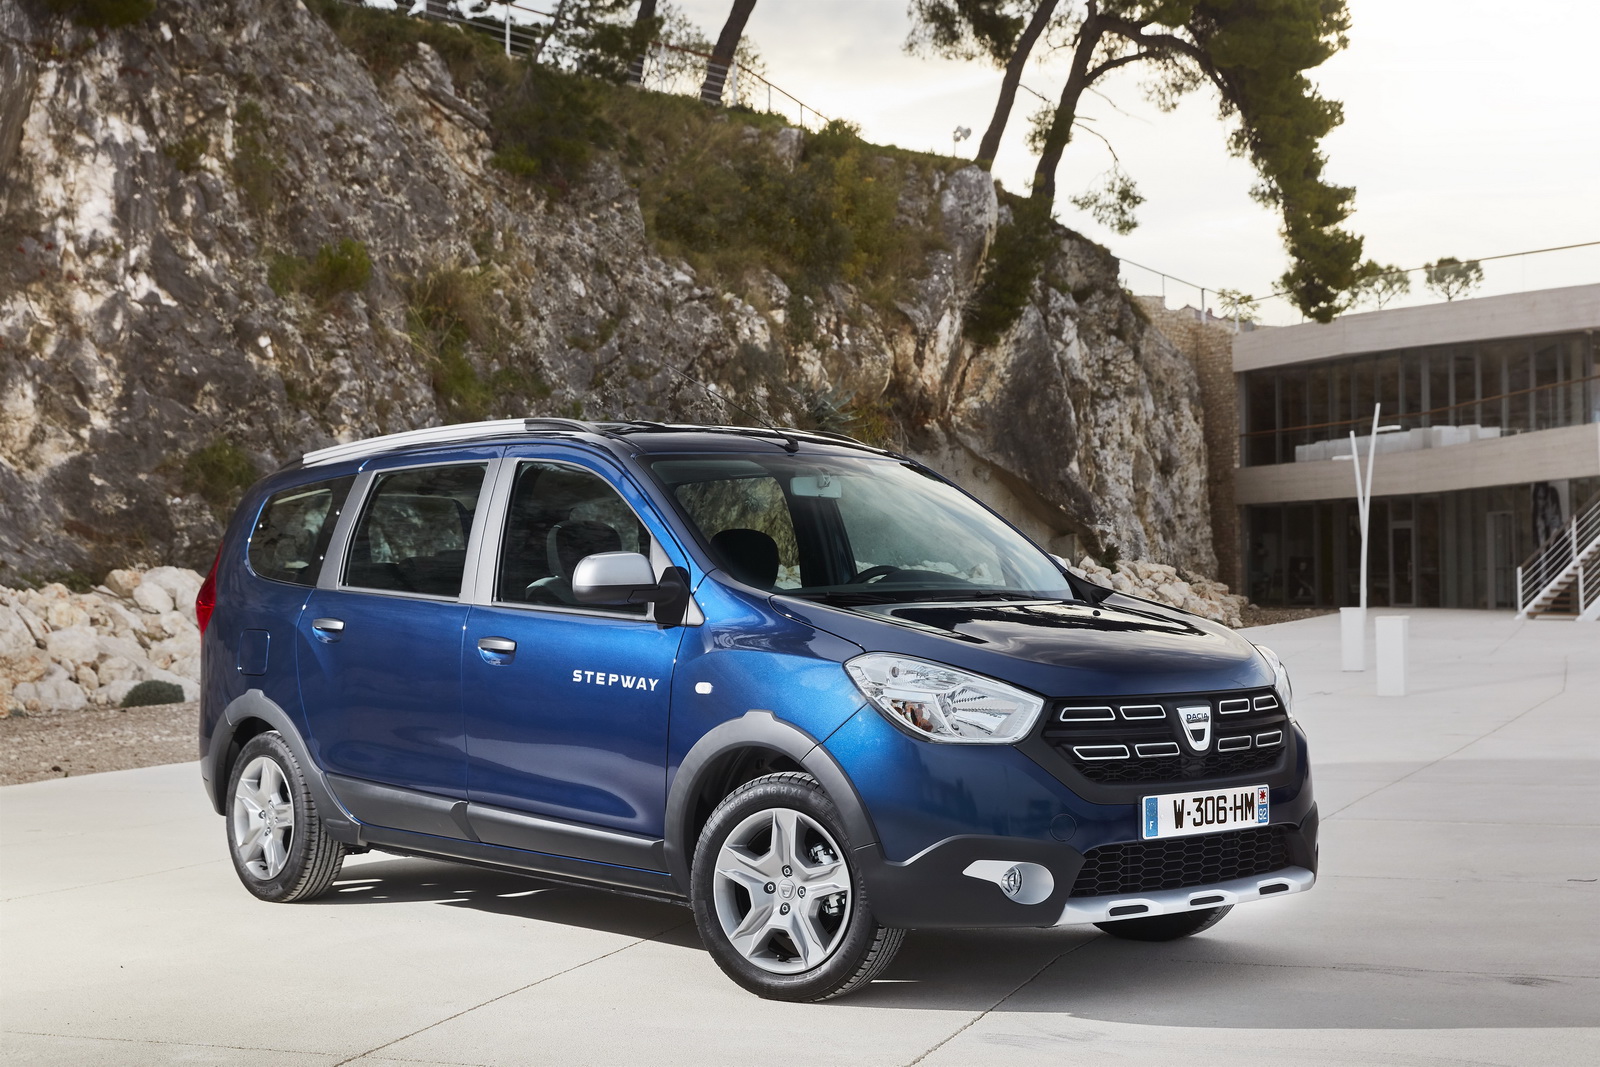 2017 Dacia Lodgy introduced with interior & exterior updates